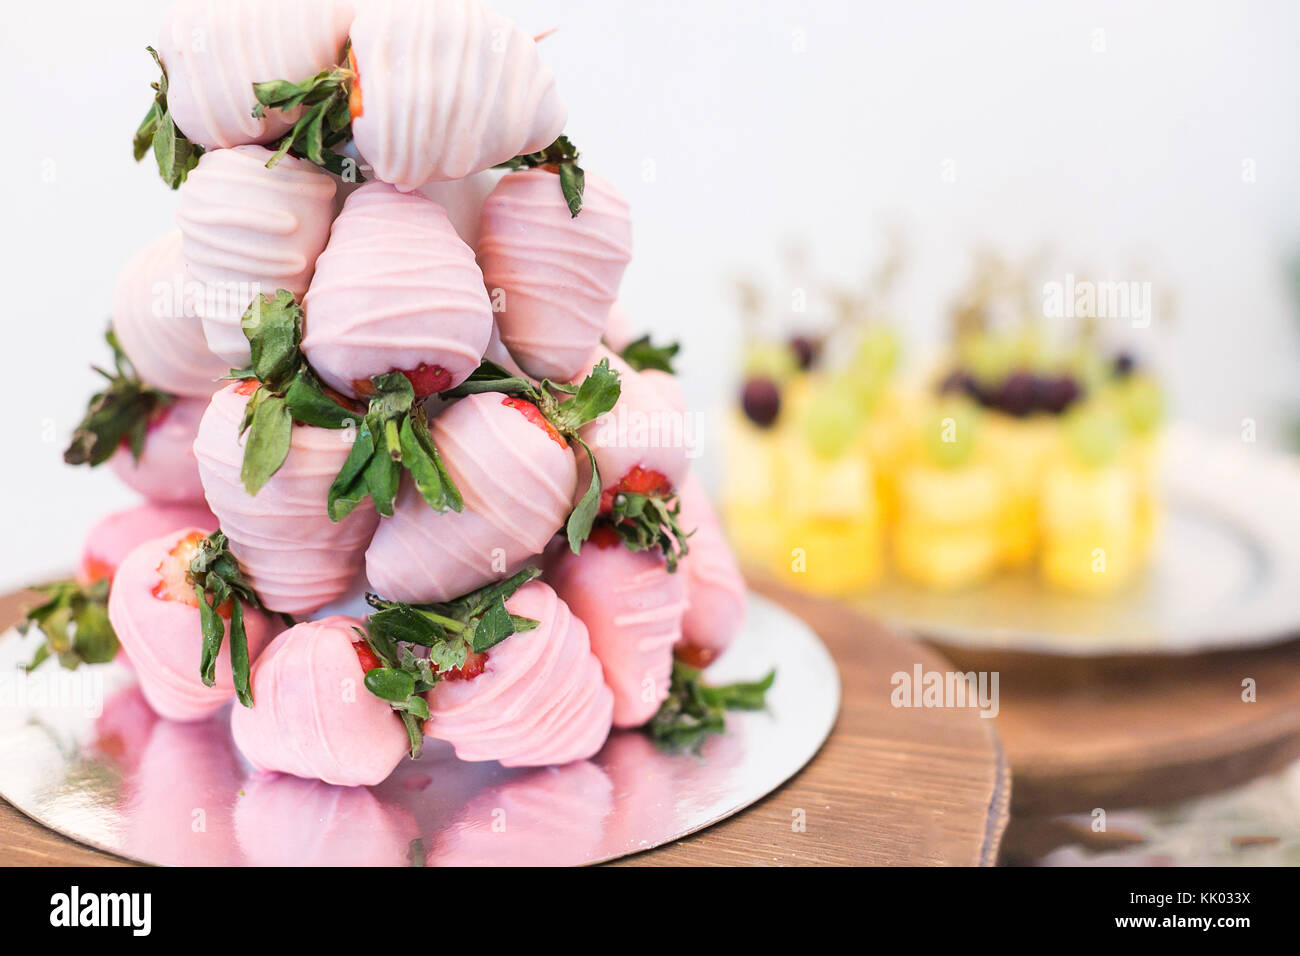 confectionary, treatment, dessert concept. close up of small pyramid on the wooden tray, it is created of strawberries that covered with light pink sweet frosting Stock Photo